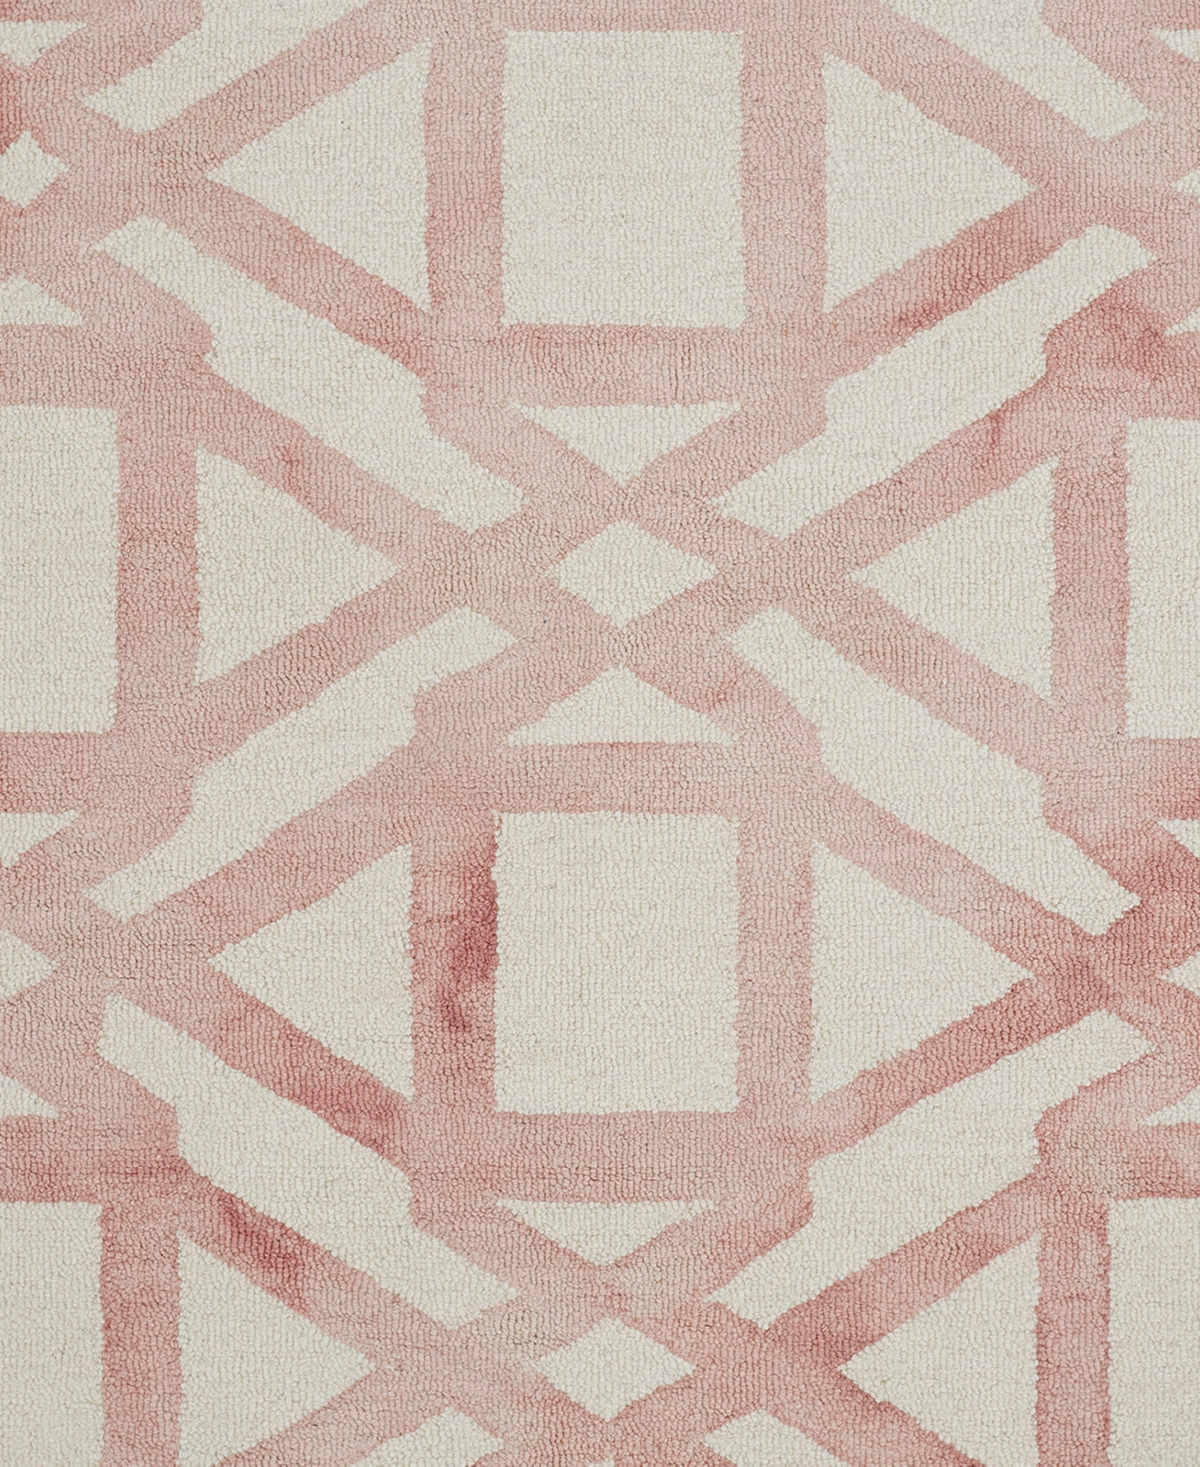 Shop Simply Woven Lorrain Spi8571 3'6" X 5'6" Area Rug In Pink,ivory